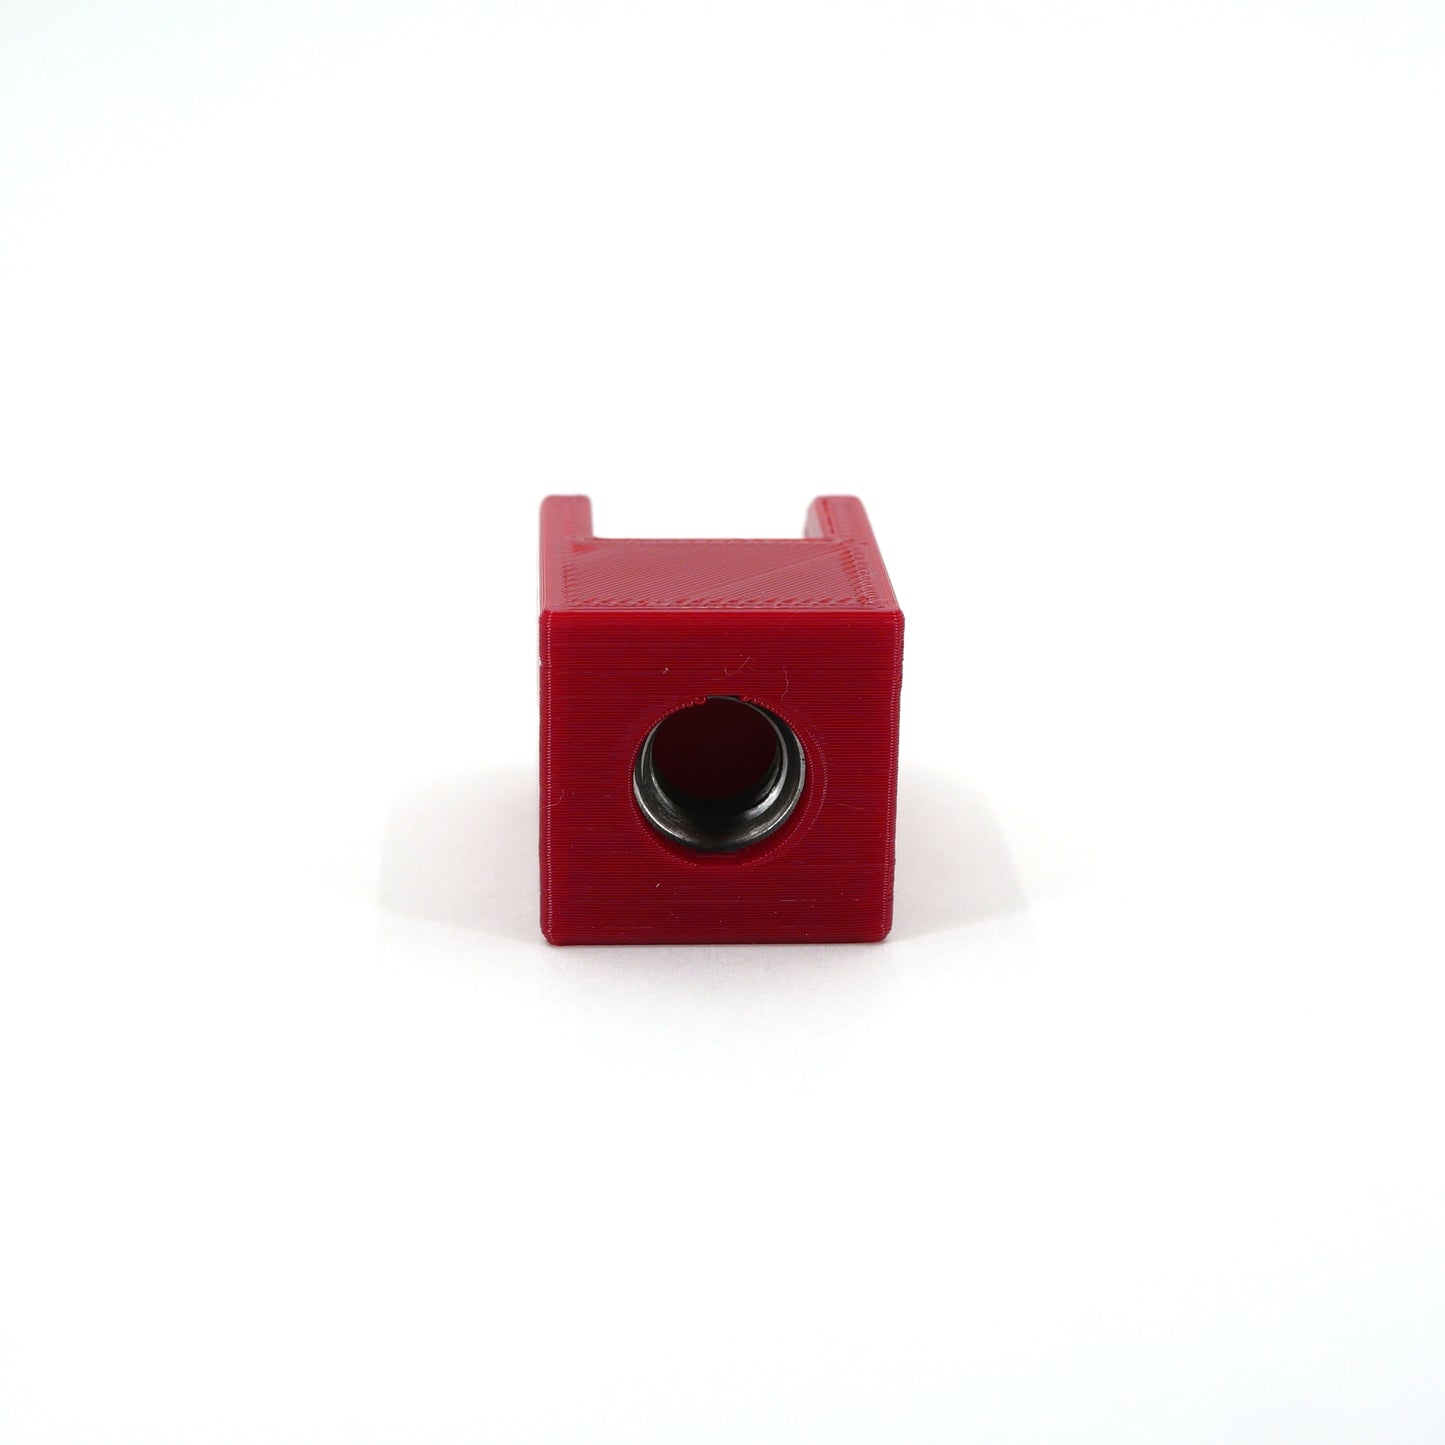 The bottom of a red HyperX QuadCast microphone mount adapter.